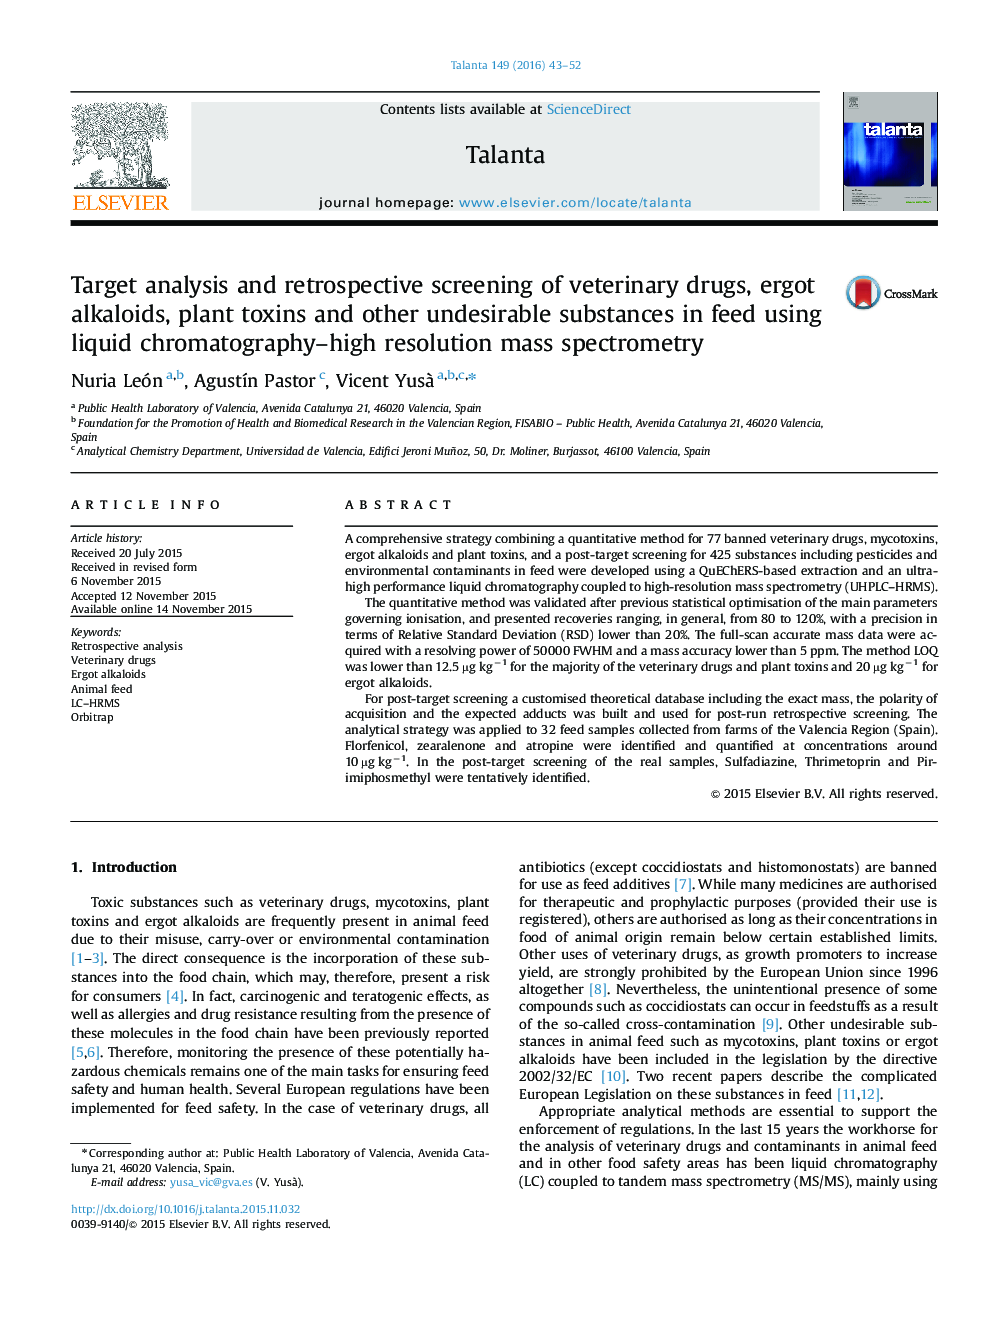 Target analysis and retrospective screening of veterinary drugs, ergot alkaloids, plant toxins and other undesirable substances in feed using liquid chromatography–high resolution mass spectrometry